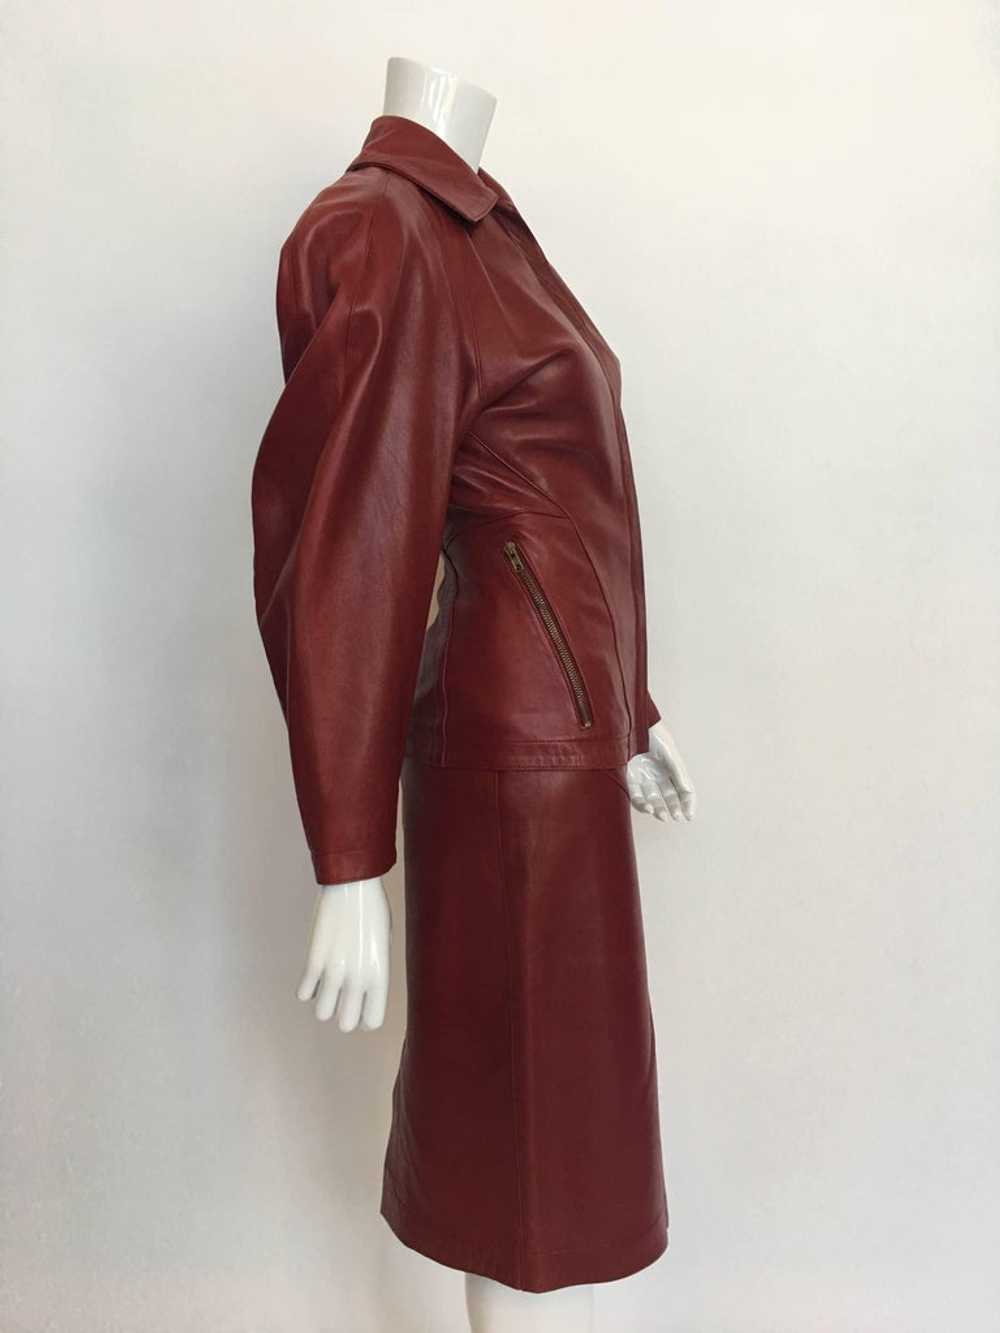 Alaïa 1980's Red Leather Skirt Suit - image 2